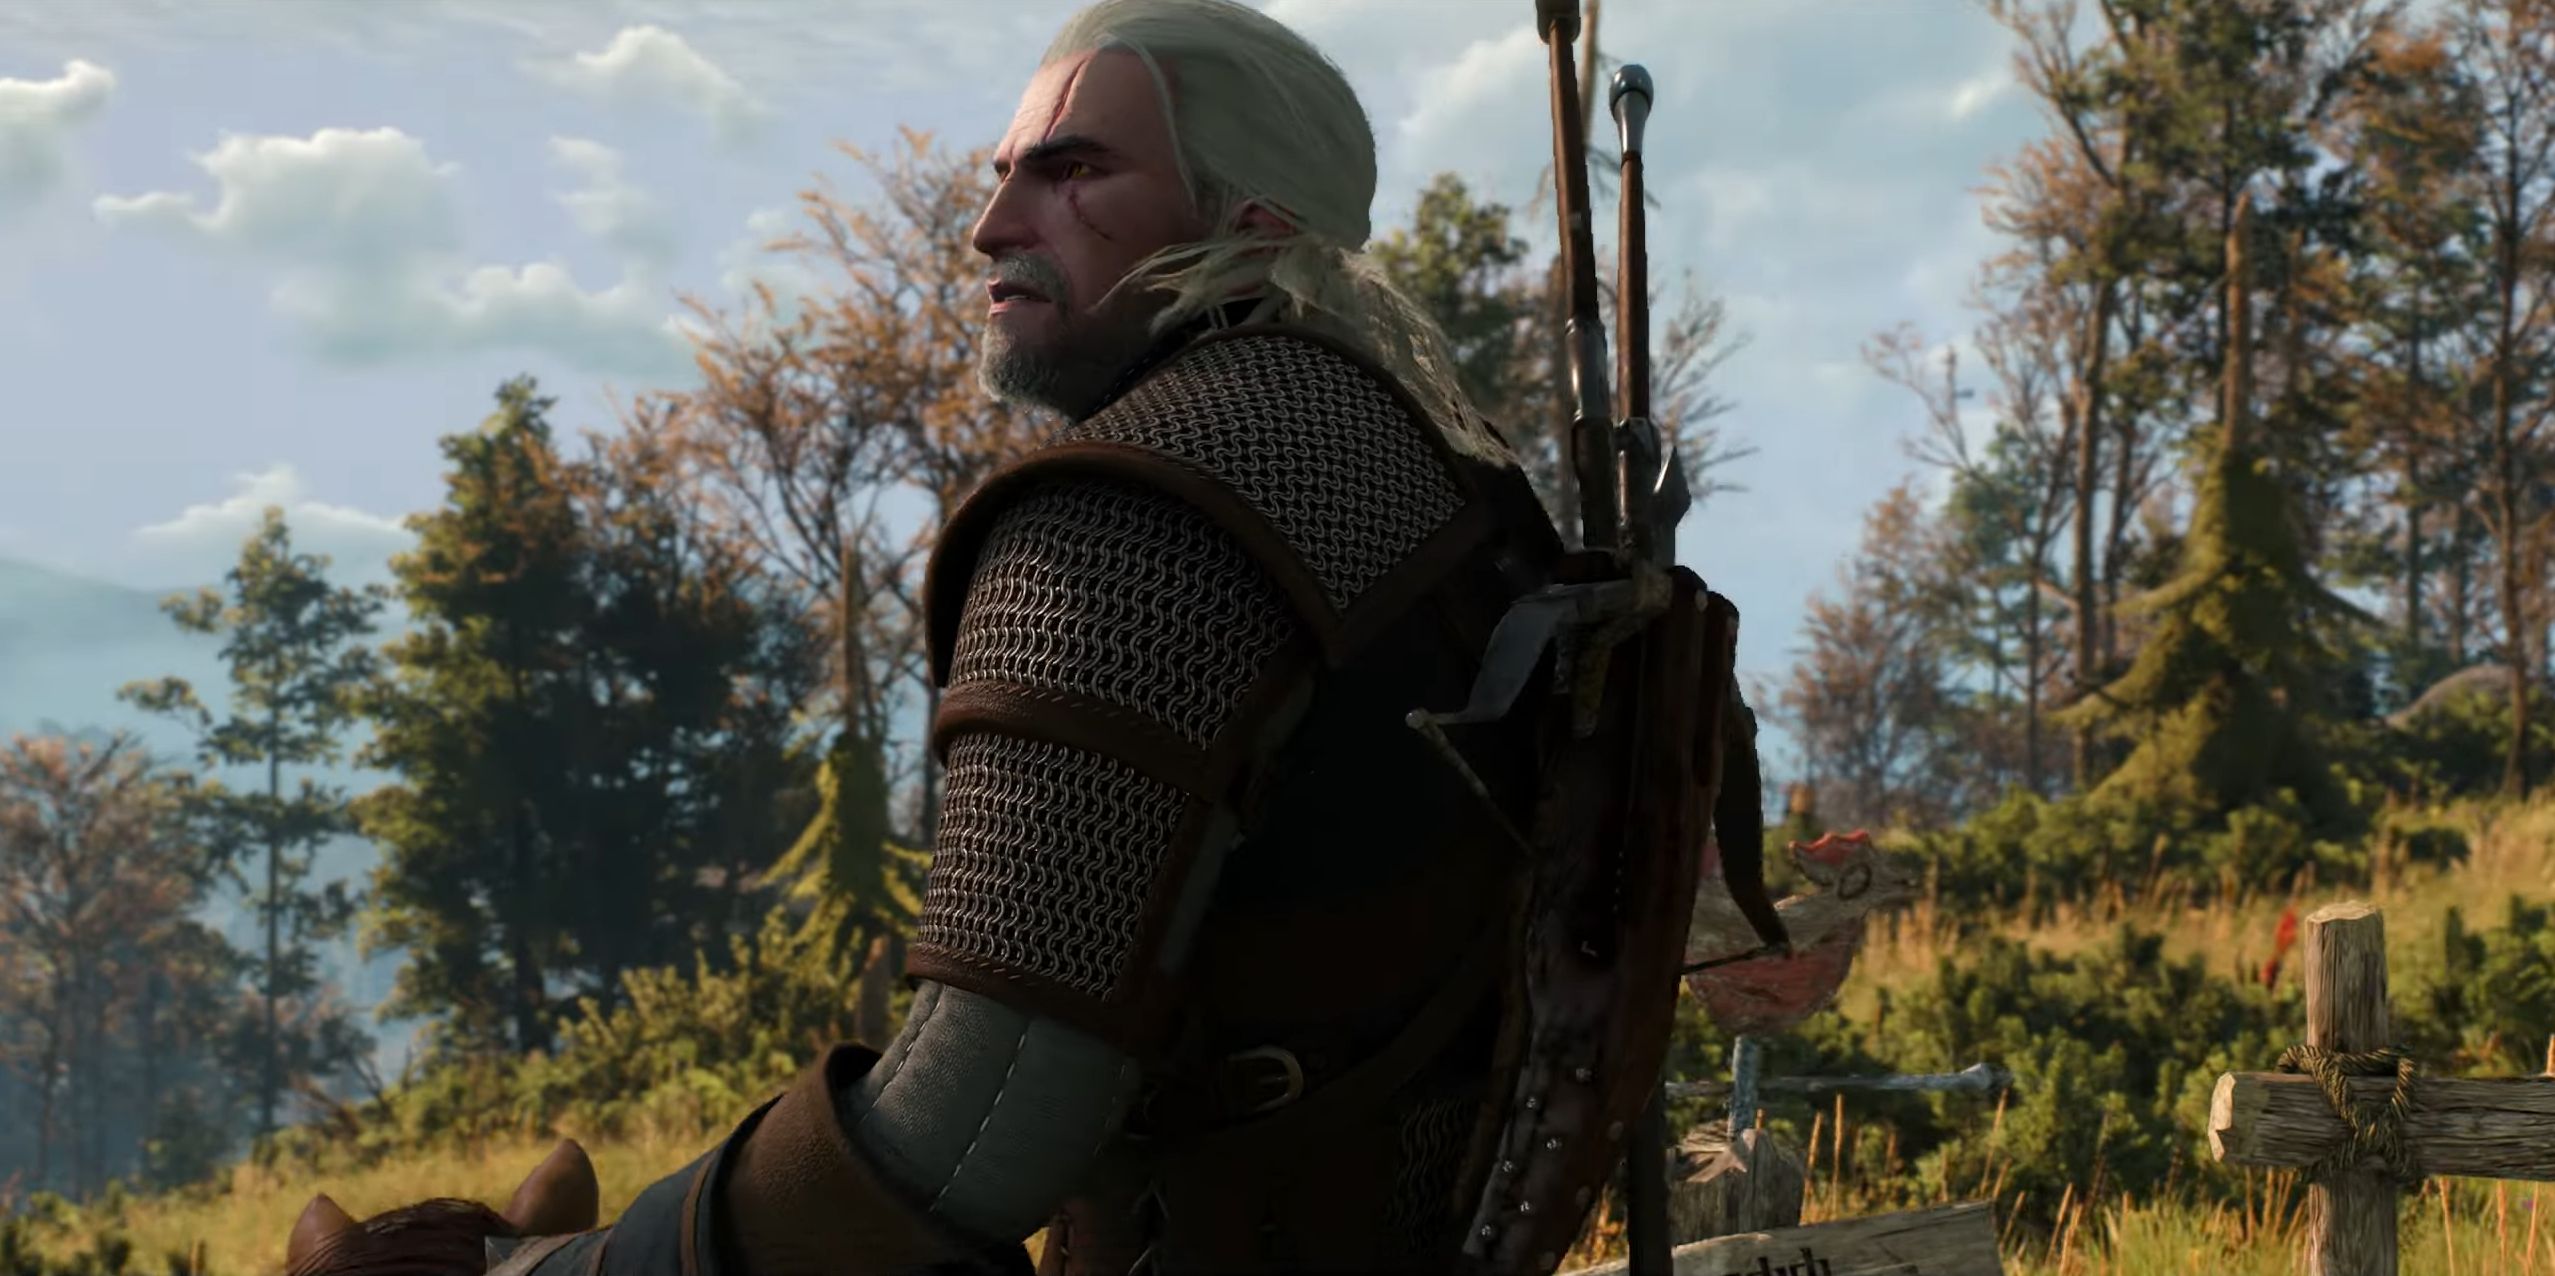 Geralt from The Witcher 3 is seen looking off into the distance while riding his horse.  He wears impressive chain mail armor and two swords, while wooden fences and trees fill the background.